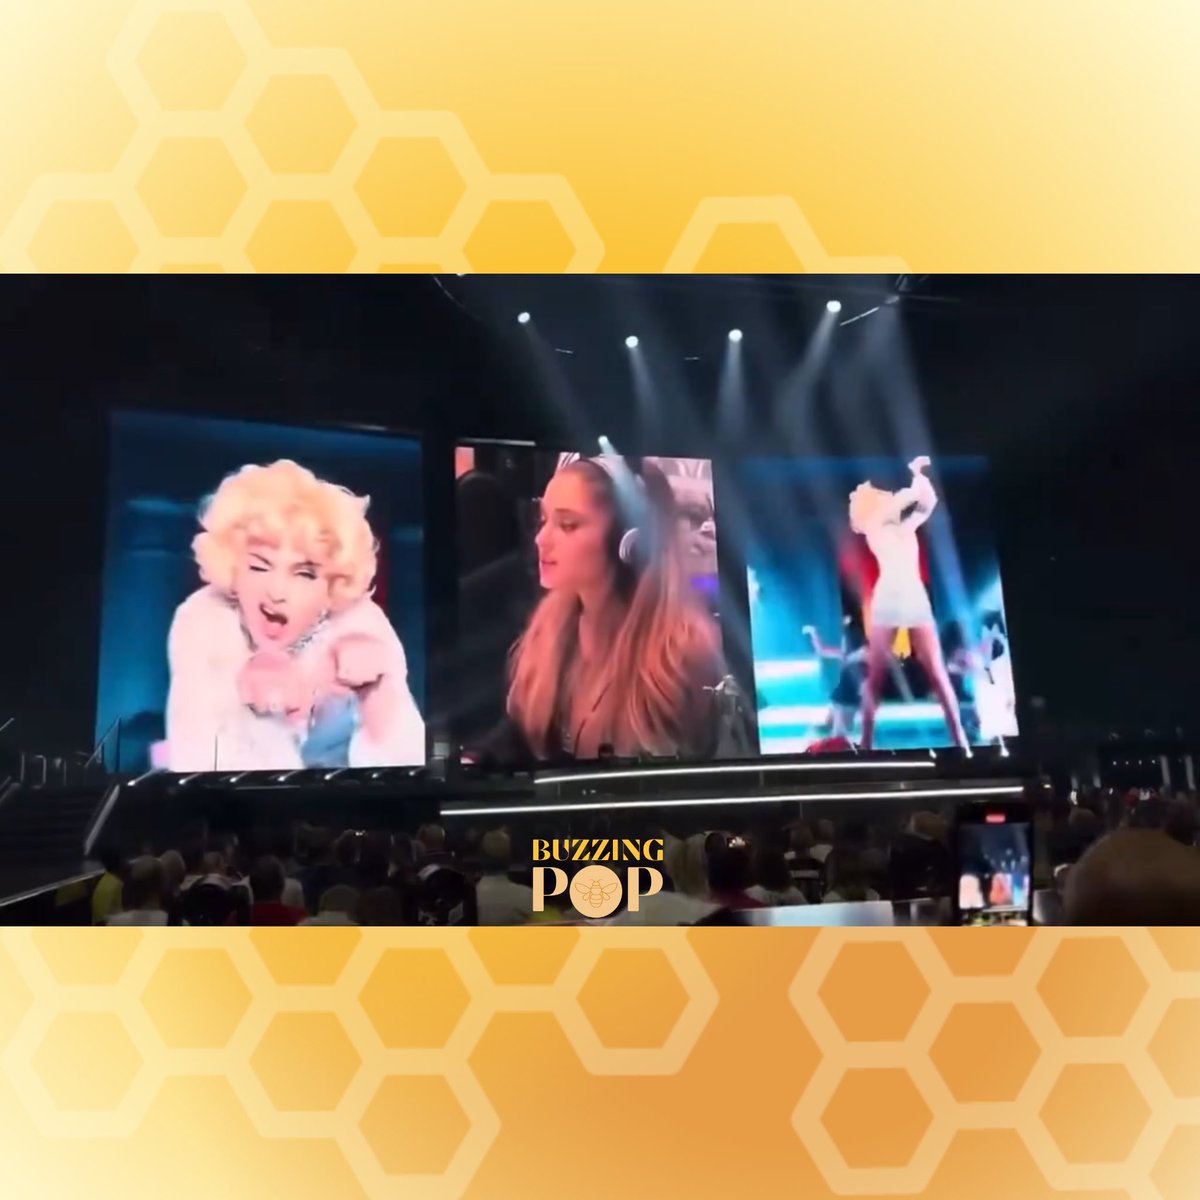 Madonna features Ariana Grande during her Rio De Janeiro show, which reportedly has 2 MILLION attendees.